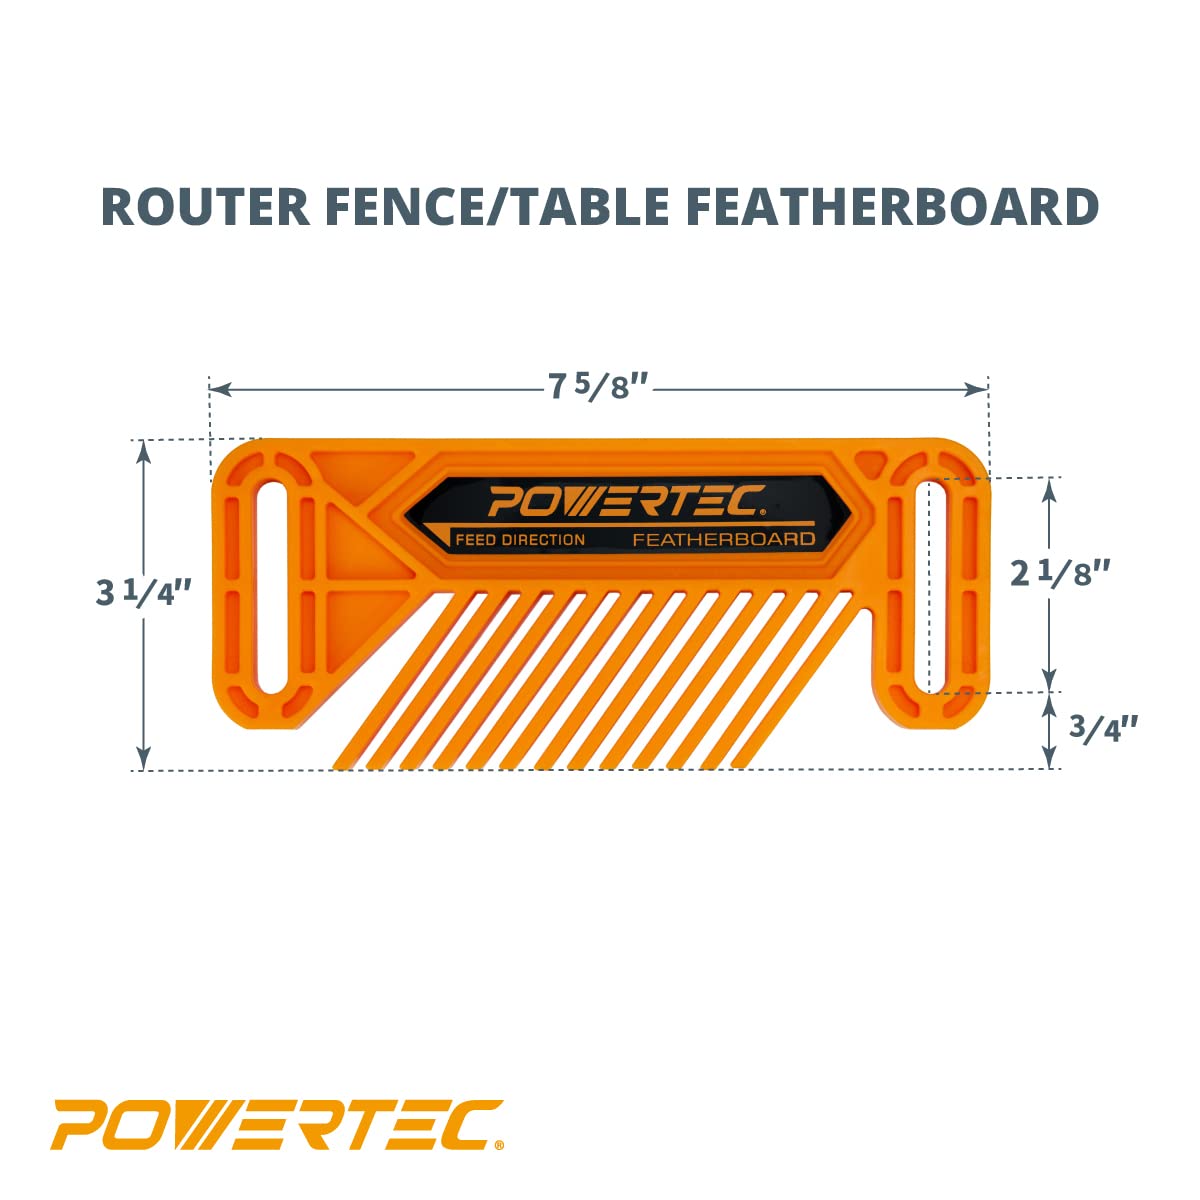 POWERTEC 71553 Router Fence/Router Table Featherboard – 2 Pack